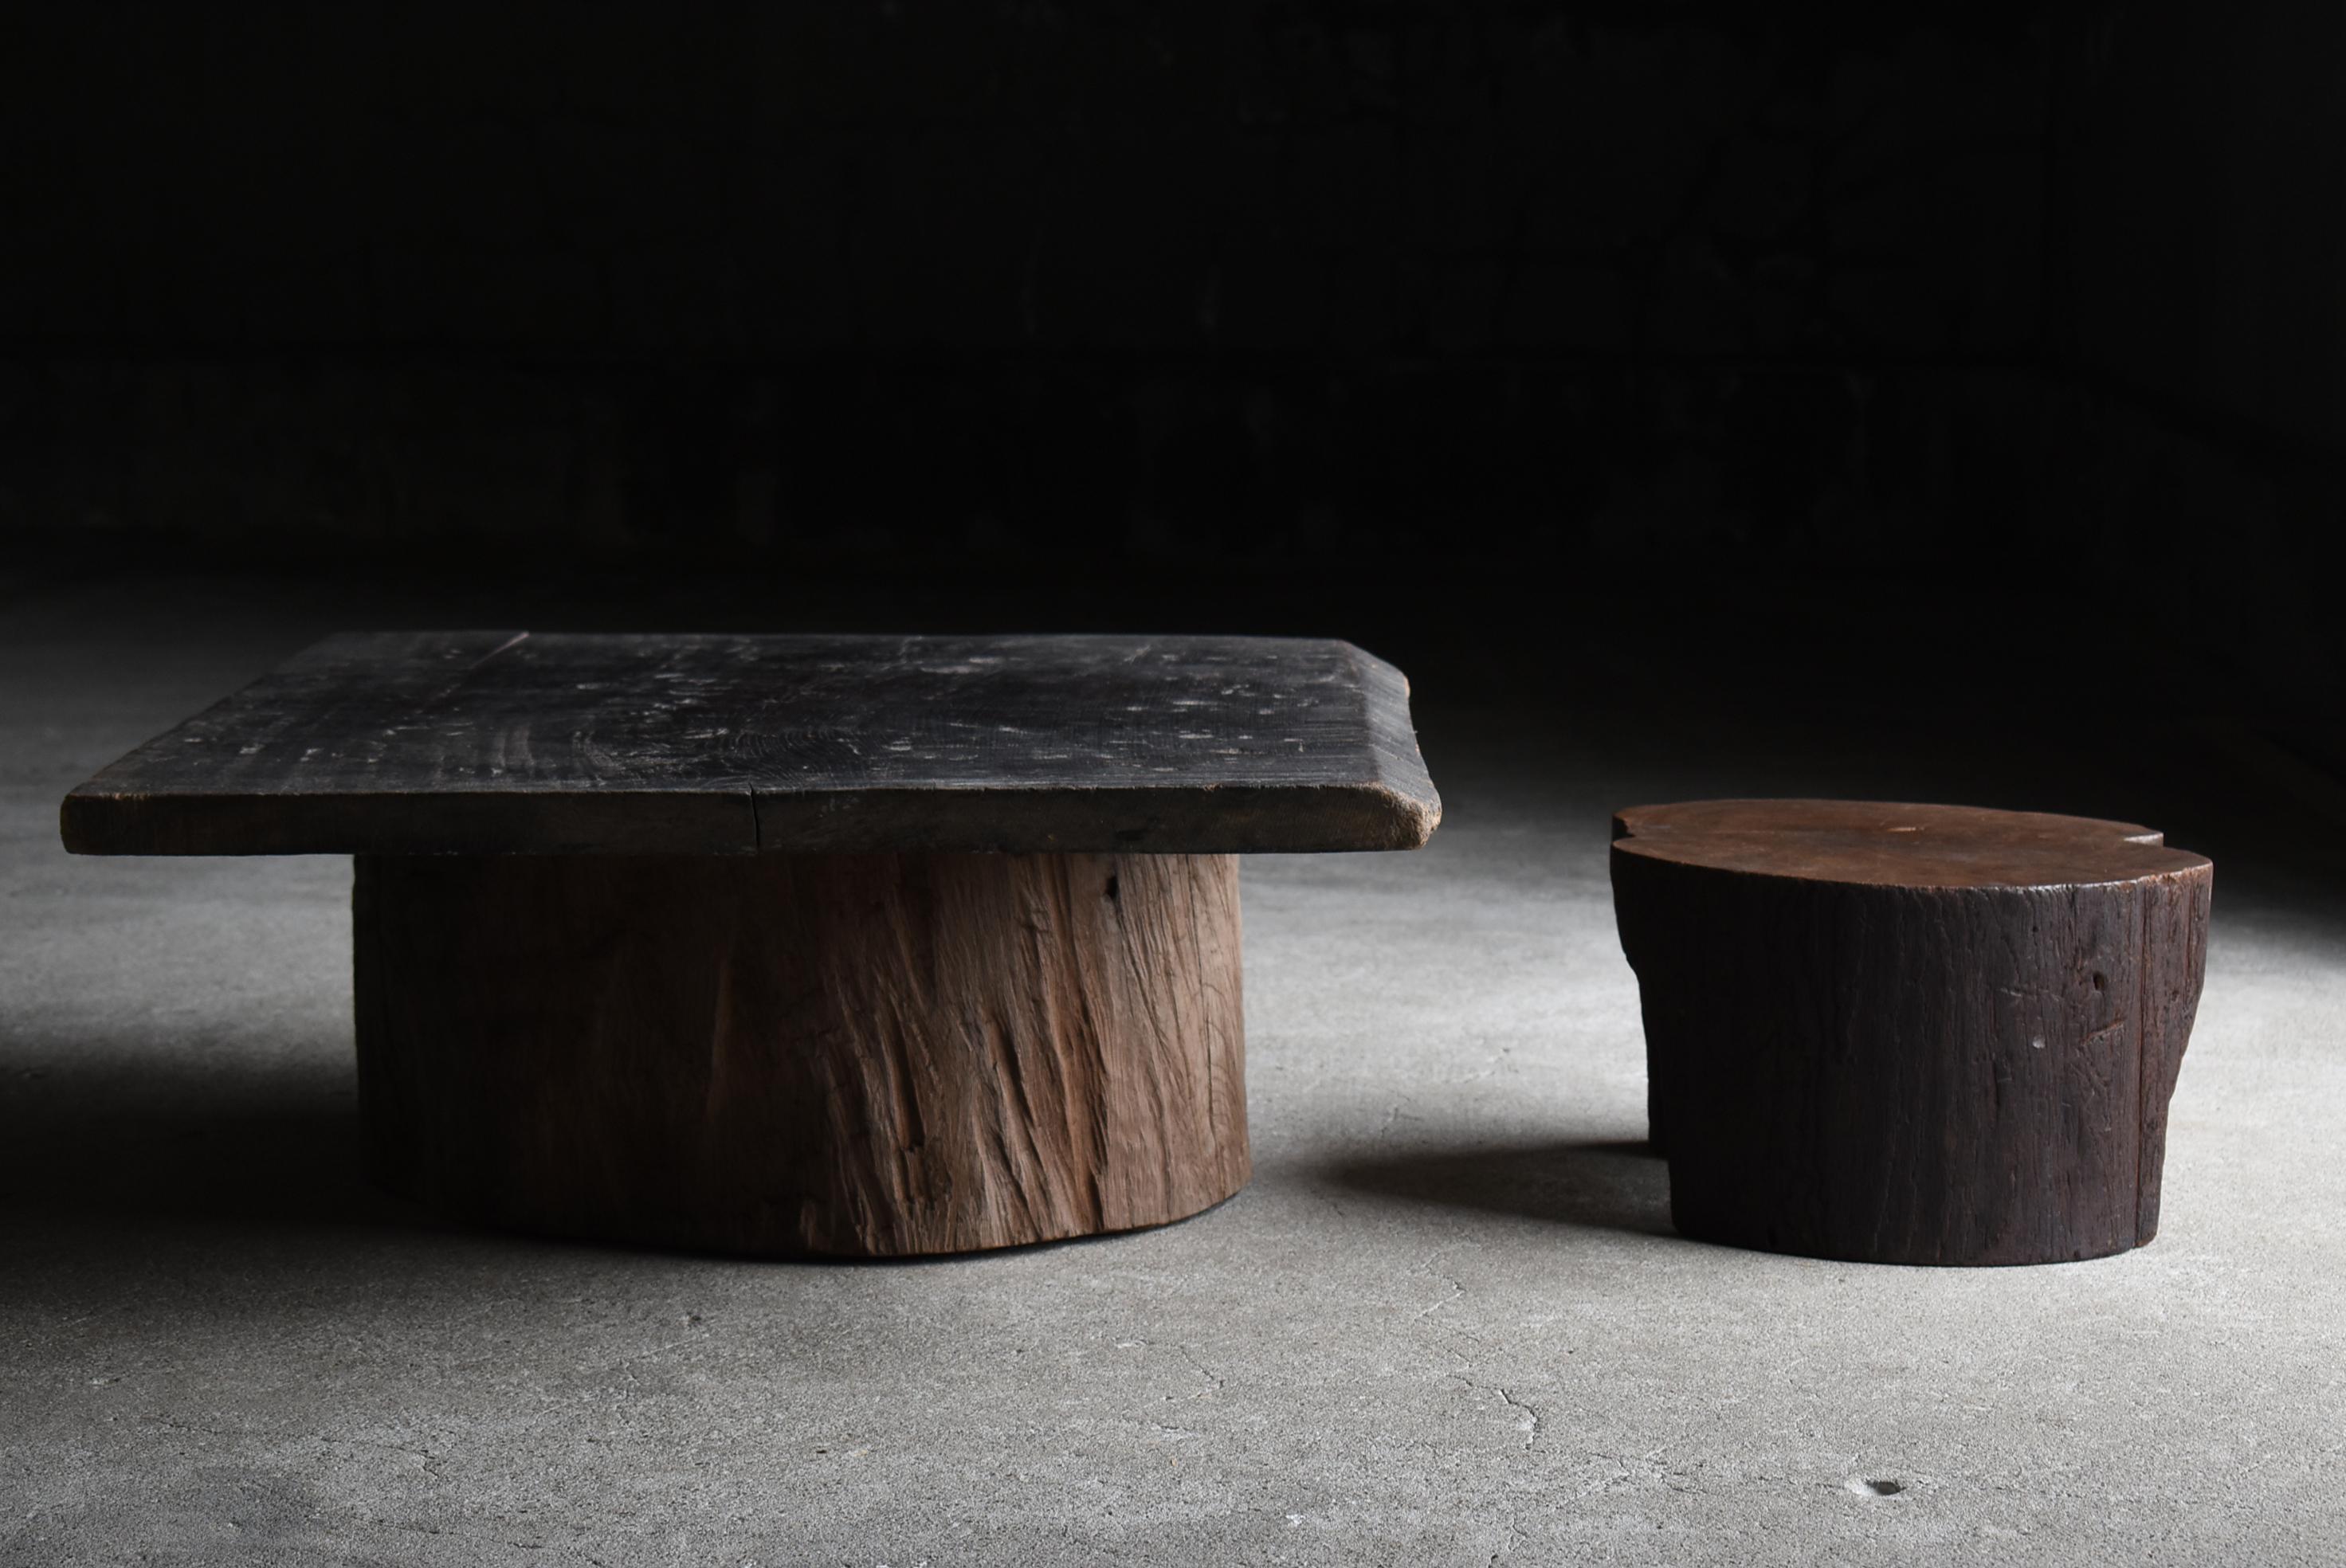 Very old Japanese primitive stool.
It was made during the Meiji period (1860s-1900s).
The material is zelkova.

It is sturdy and stable.
The grain of the zelkova wood is beautiful.

It is recommended not only as a chair, but also as a side